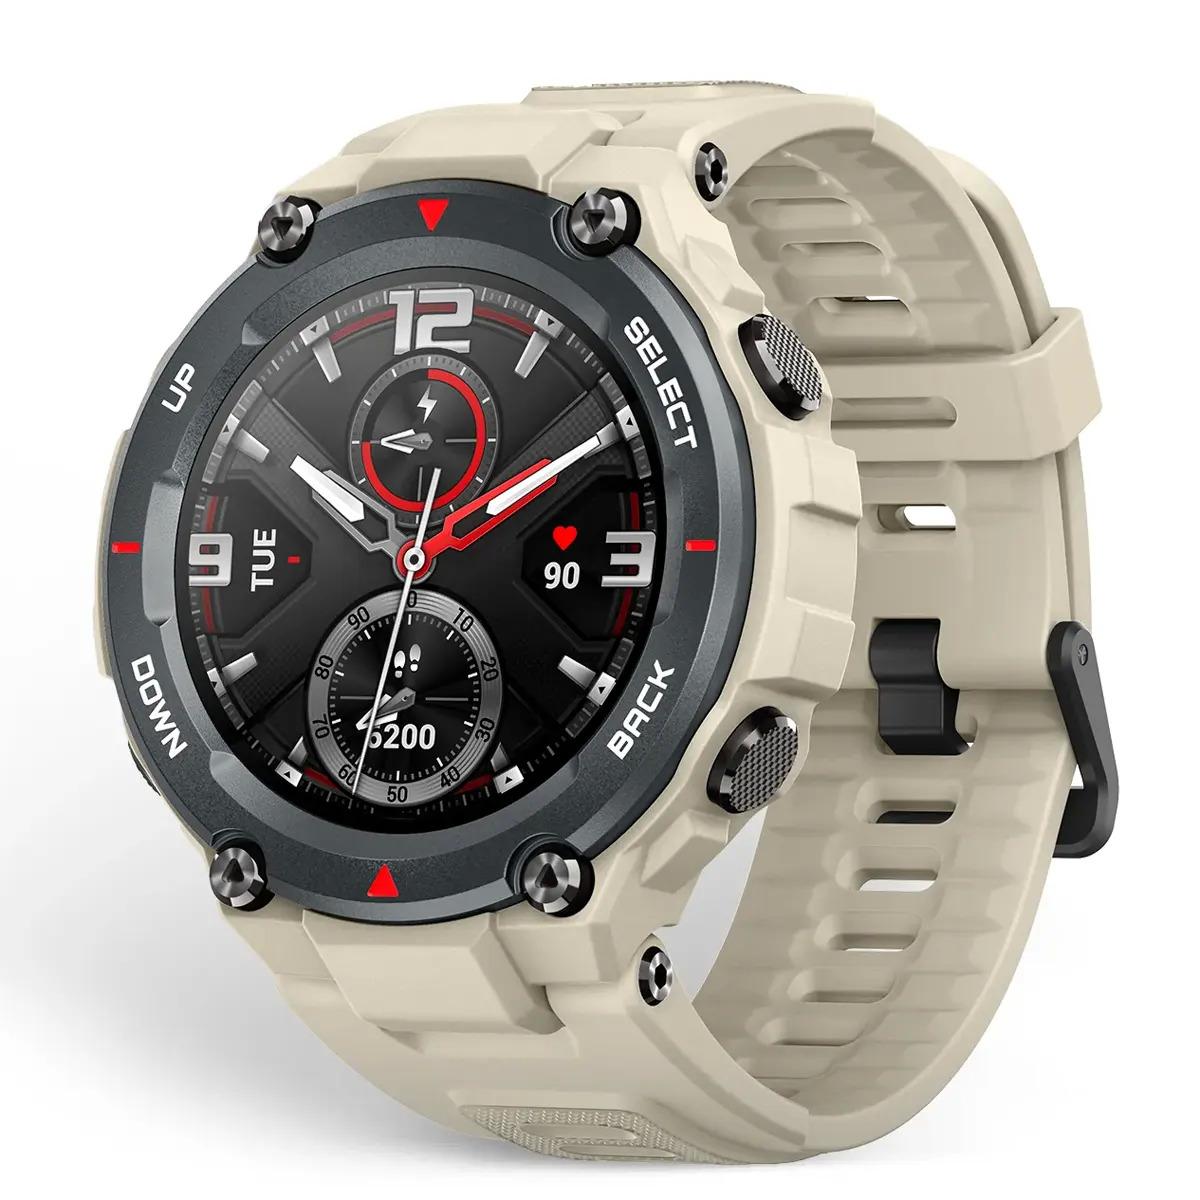 Amazfit T-Rex GPS Smartwatch for $69.99 Shipped